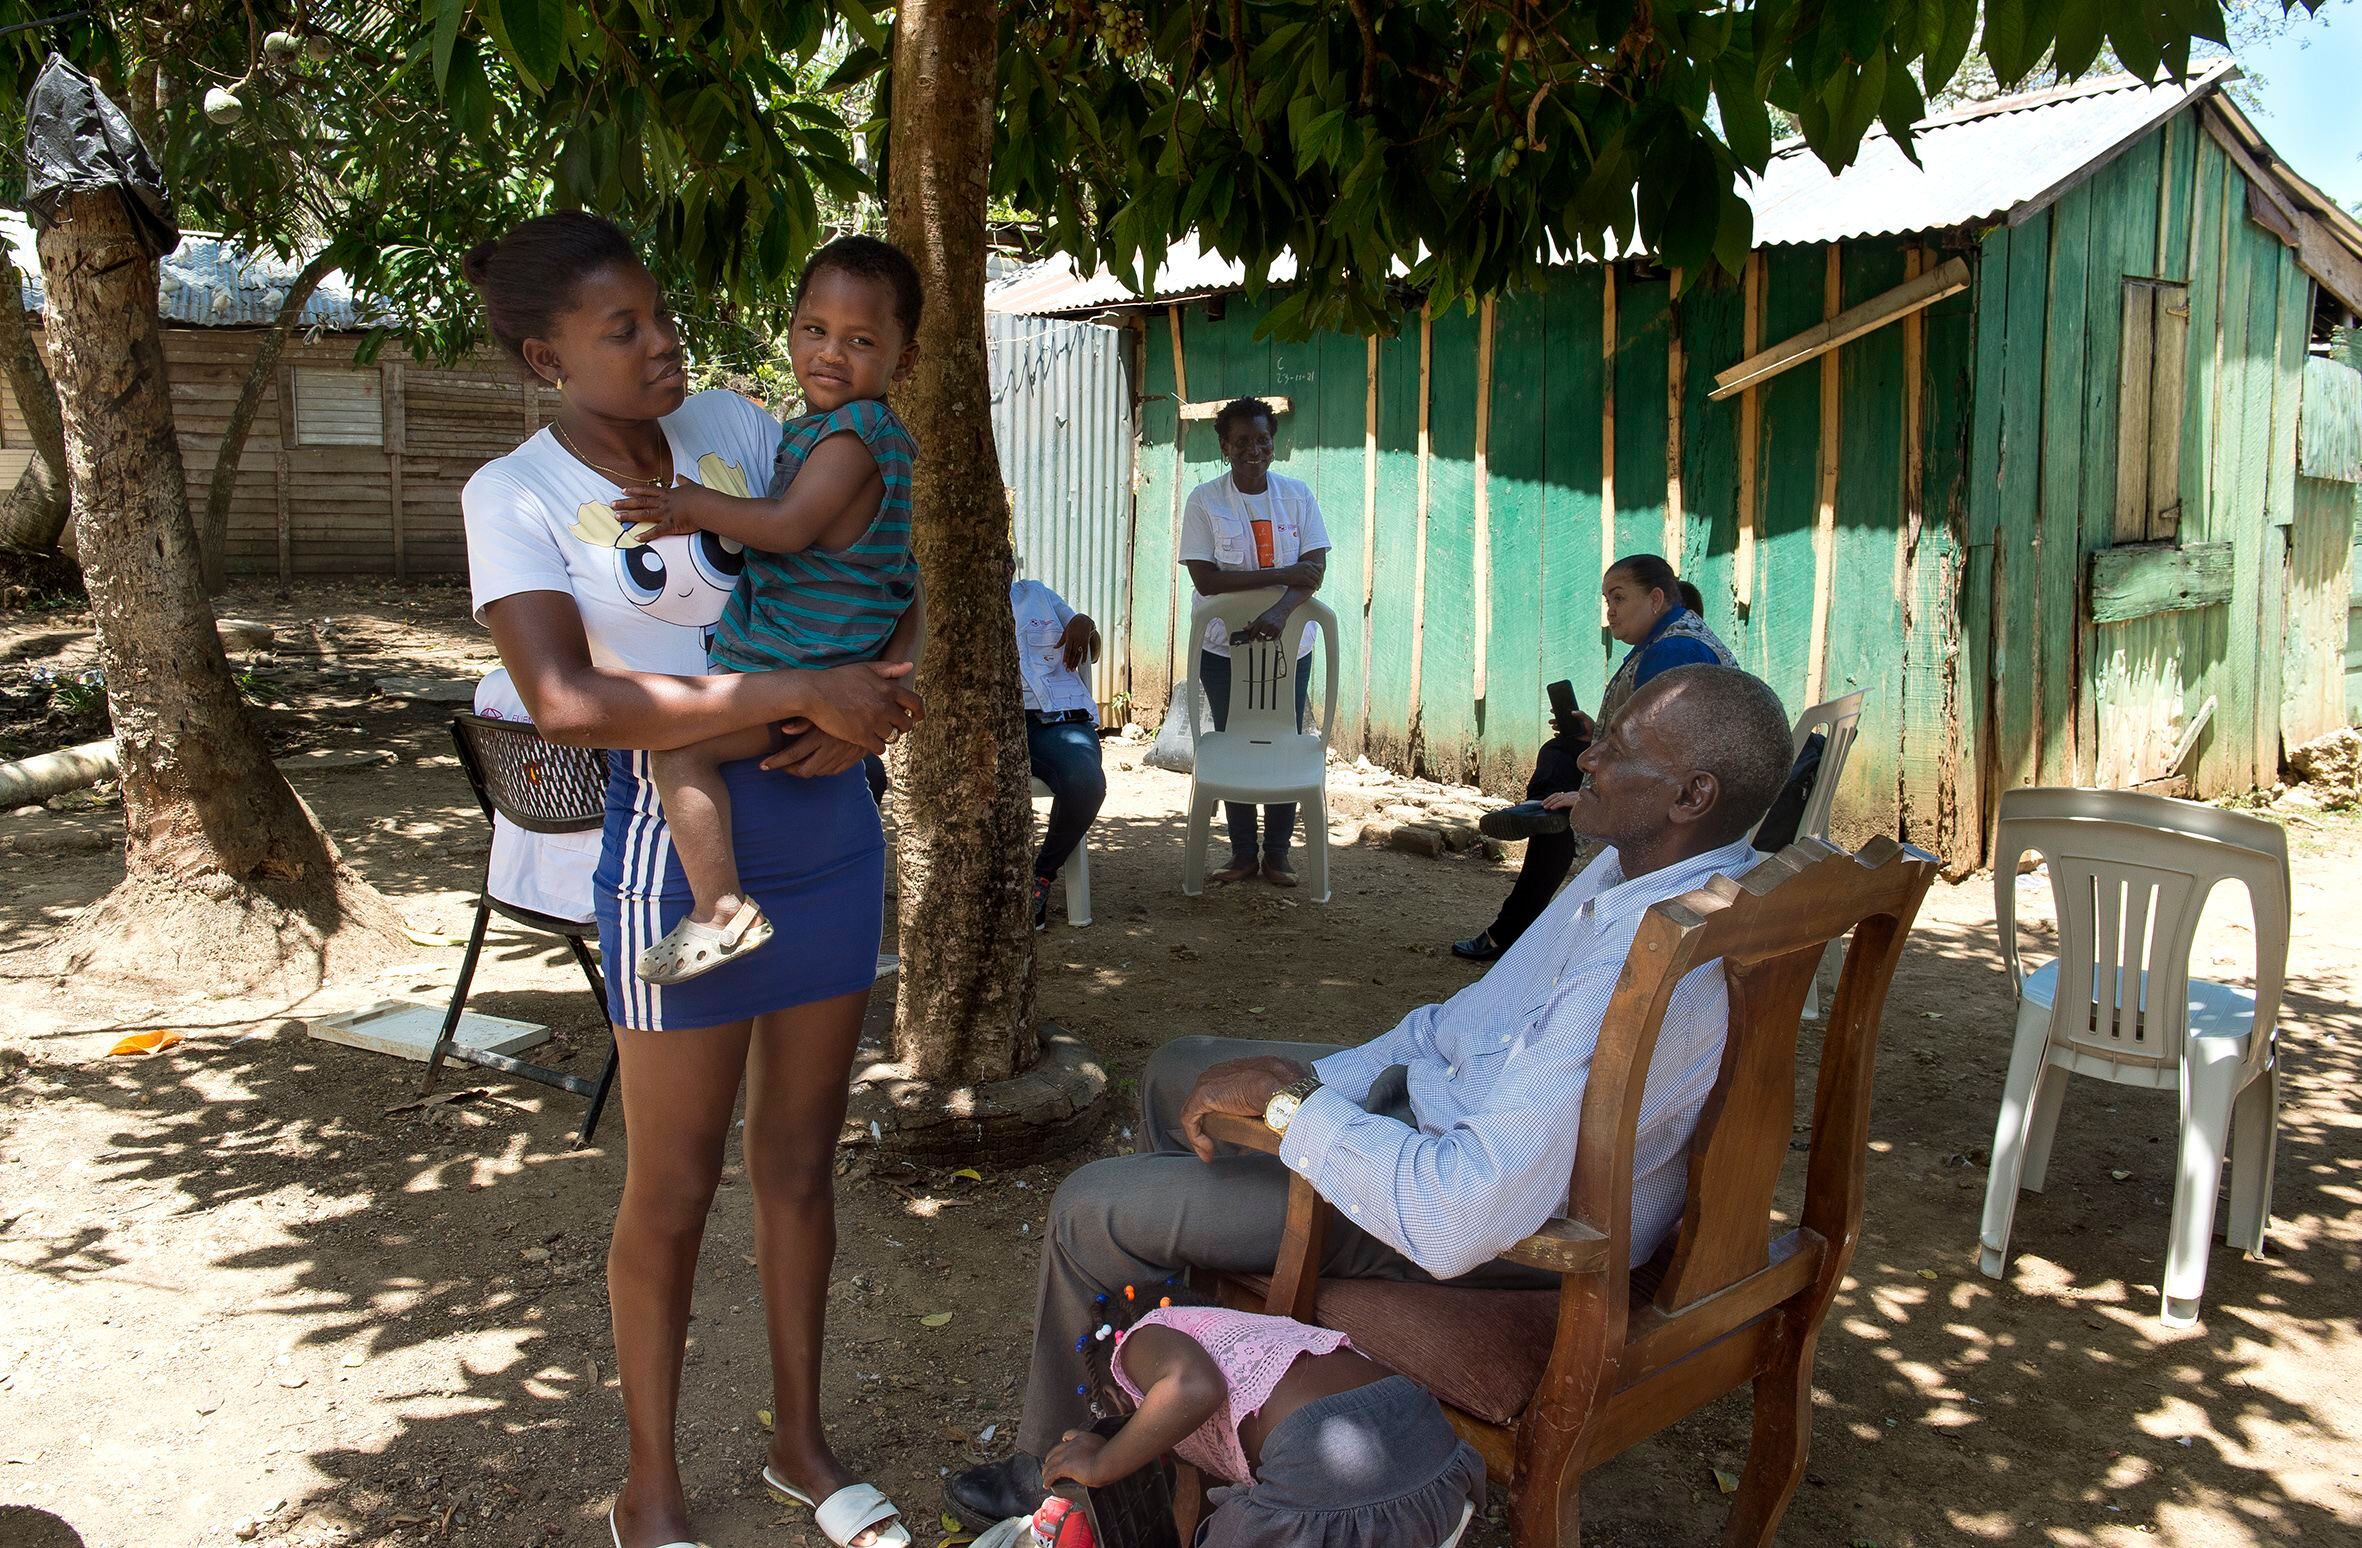 Without family support to help her care for her children, Yésica Prensa isn’t able to resume her studies or find a job. In this photograph, she speaks with her grandfather – her only close relative – who is a pastor in the community of Mata los Indios.